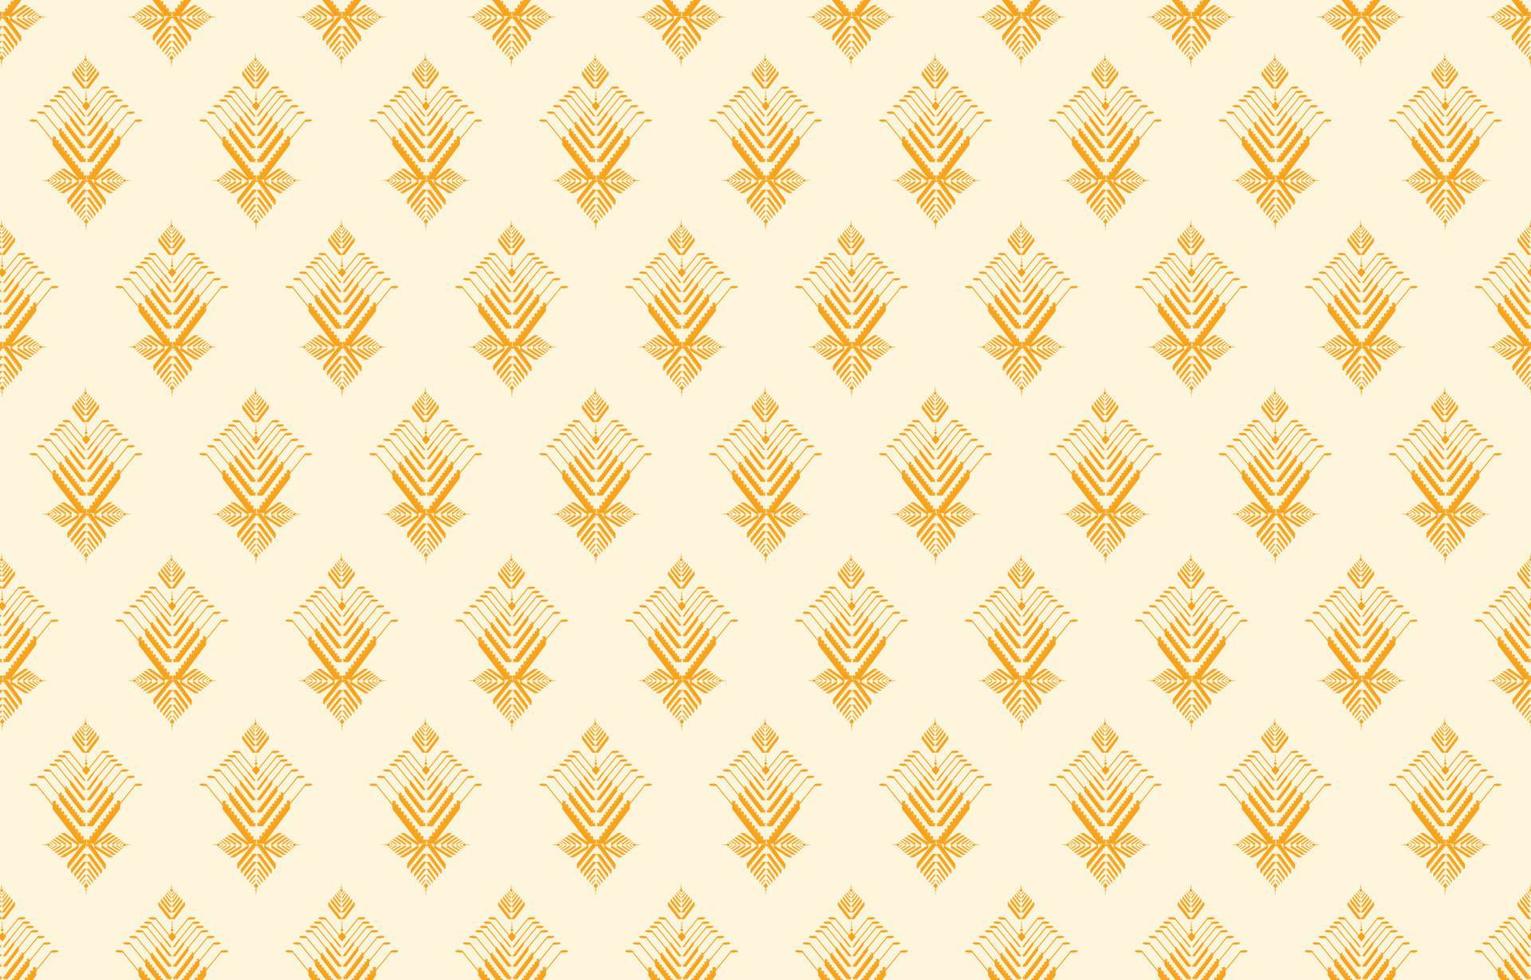 Gemetric ethnic oriental pattern. Traditional sealess pattern cool color tone. Design for background,carpet,wallpaper,clothing,wrapping,batic,fabric,print,tile,vector illustraion.embroidery style. vector